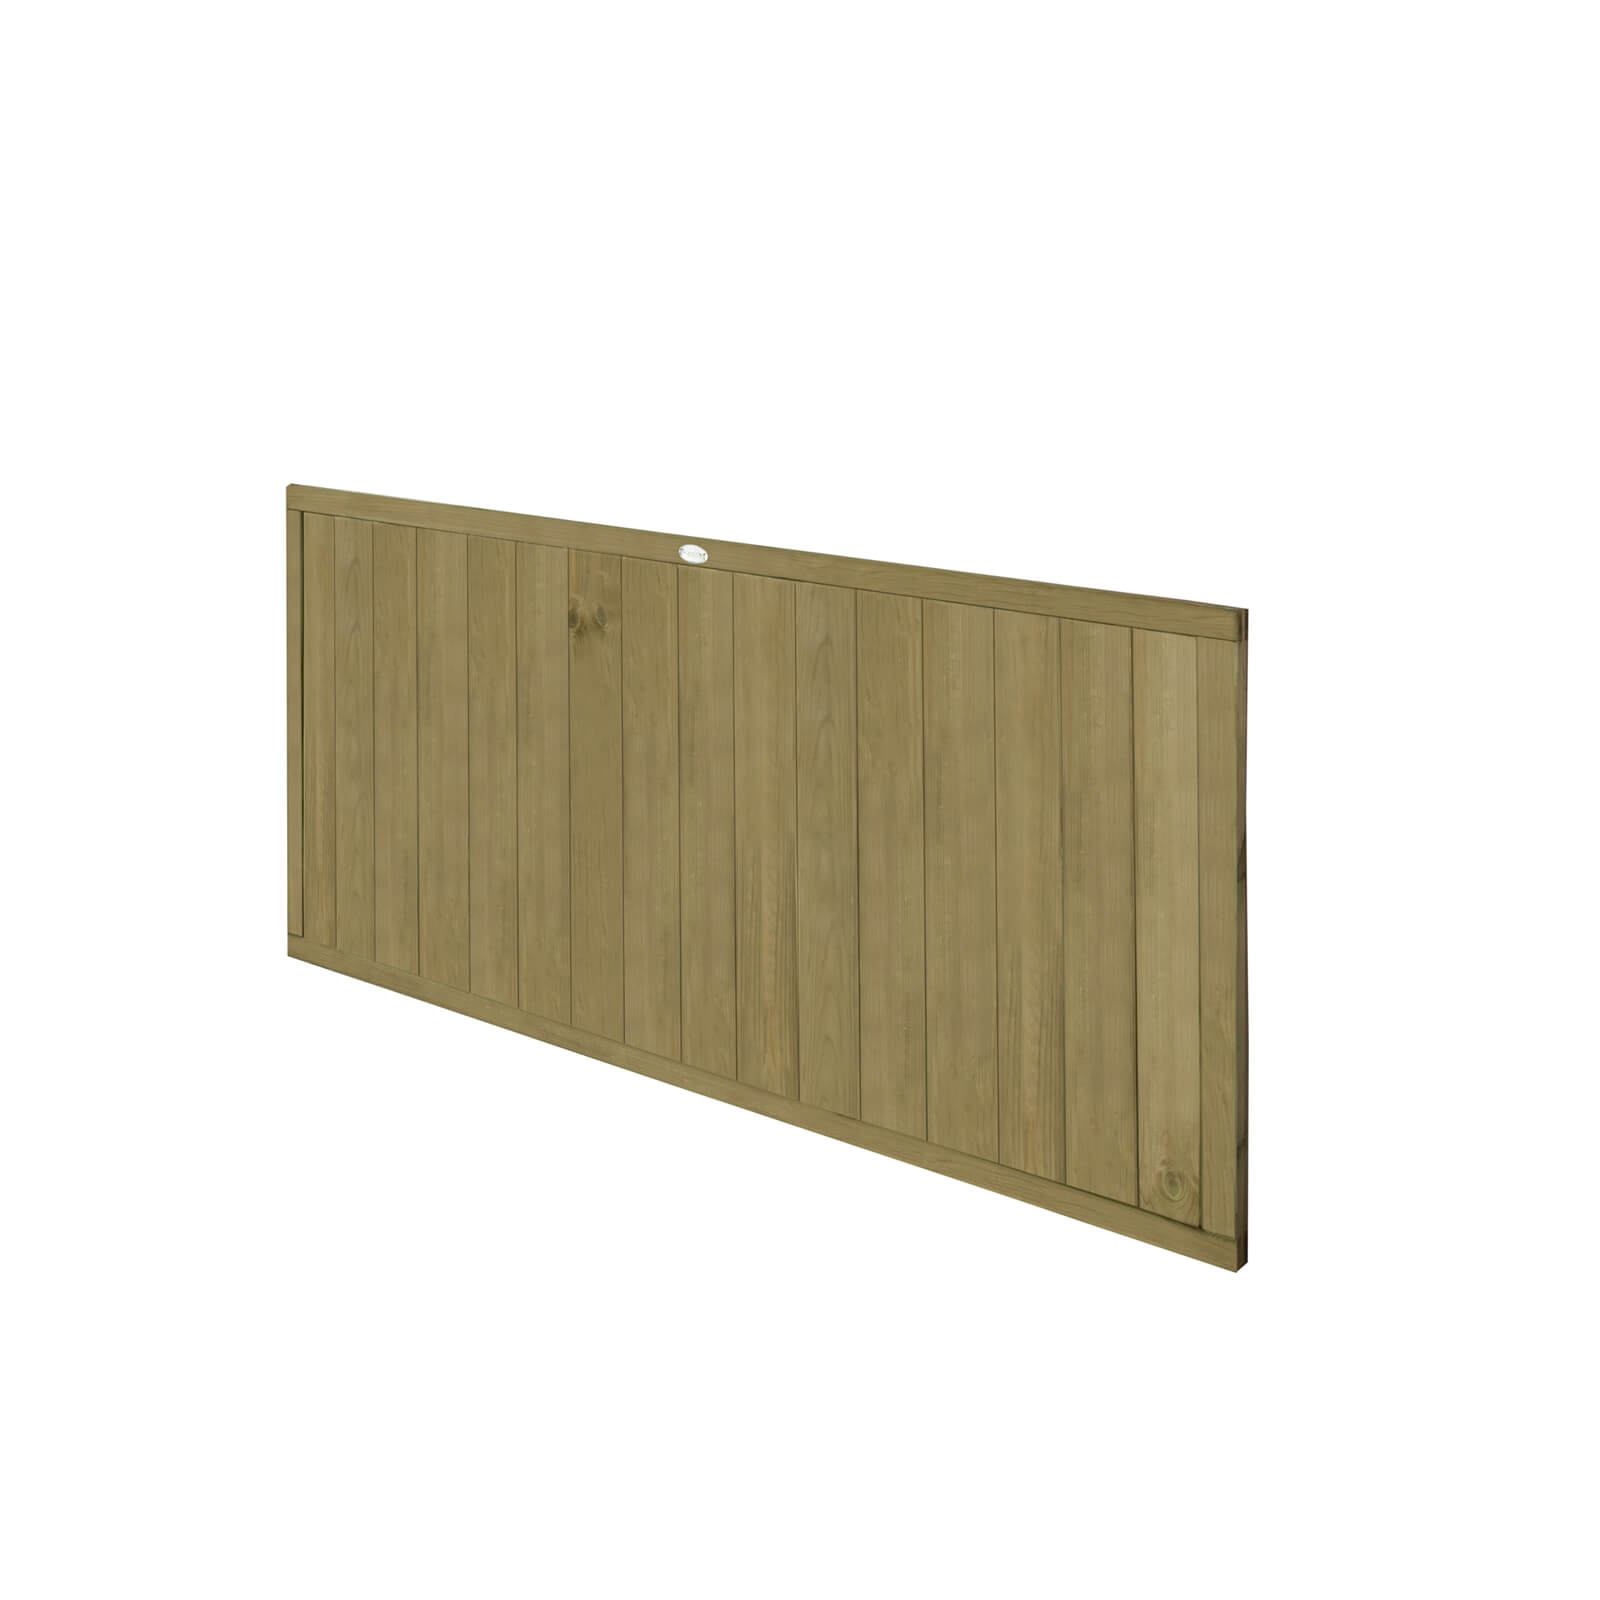 Forest Vertical Tongue & Groove Fence Panel - 3ft - Pack of 4